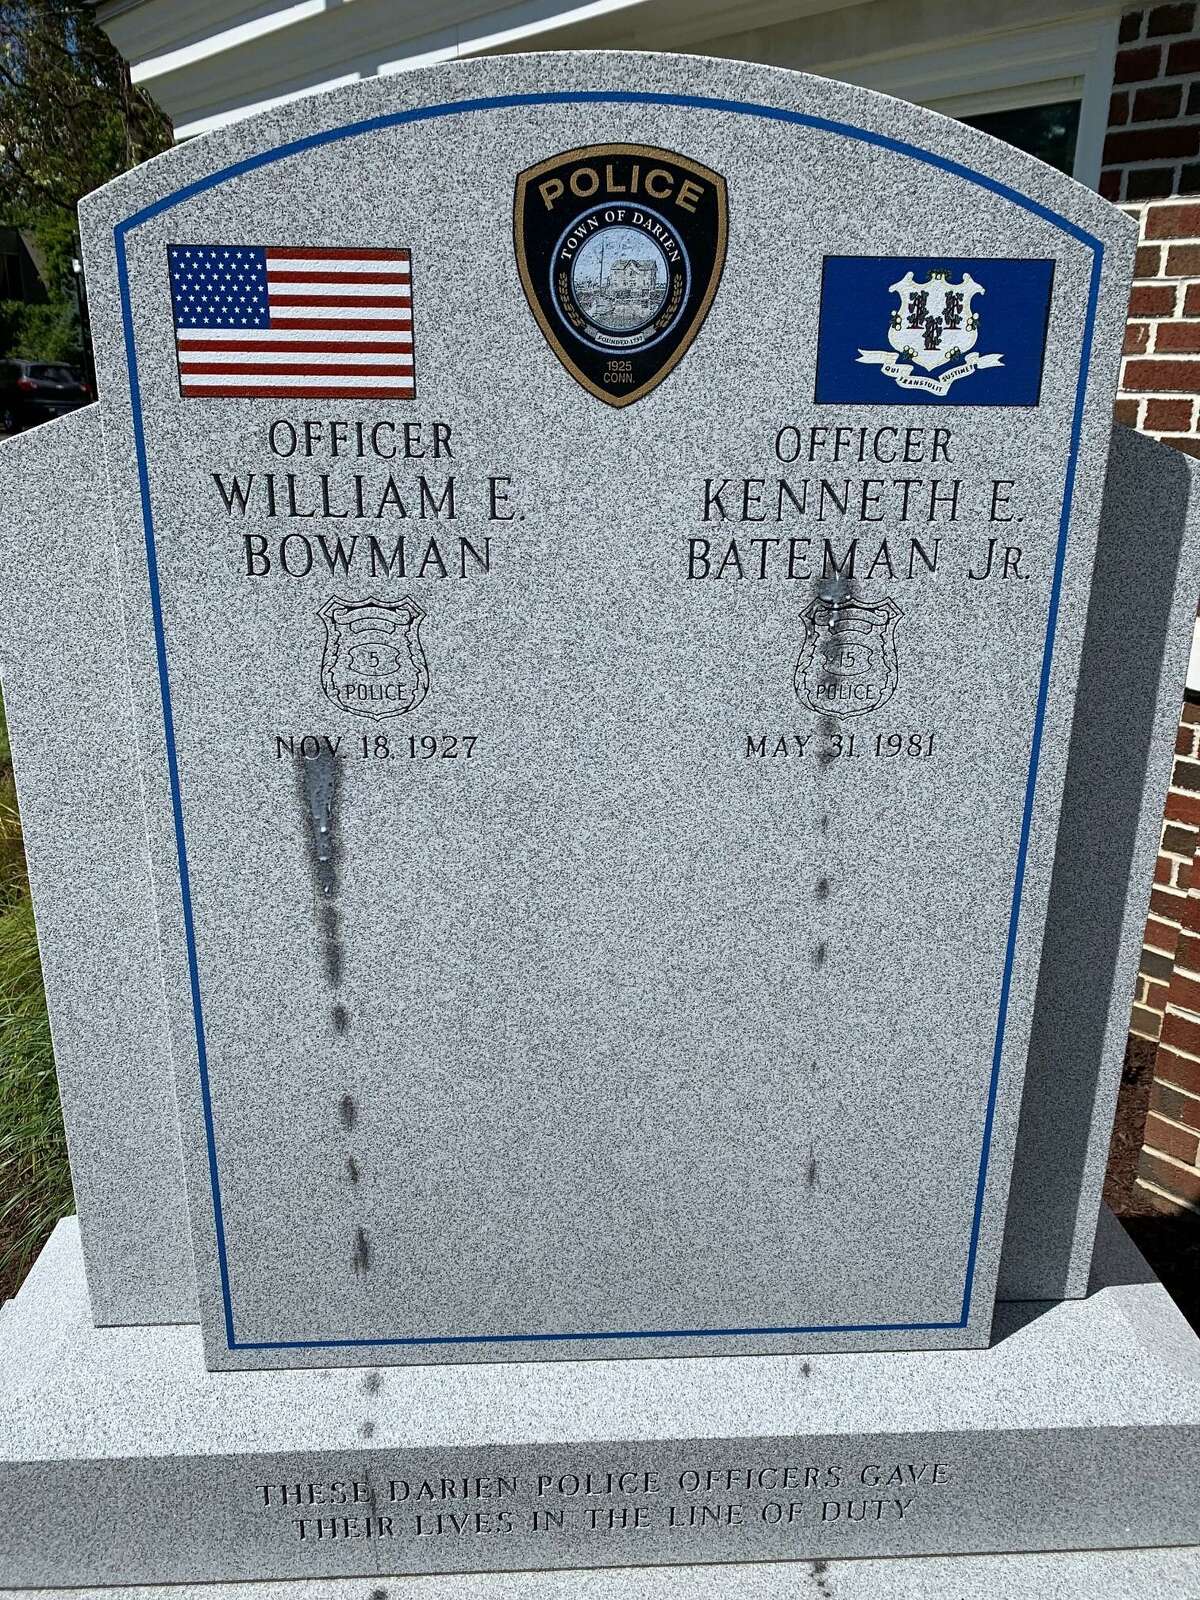 A monument dedicated to the memory of two fallen Darien police officers was defaced using what police believe to be a wax paintball gun.